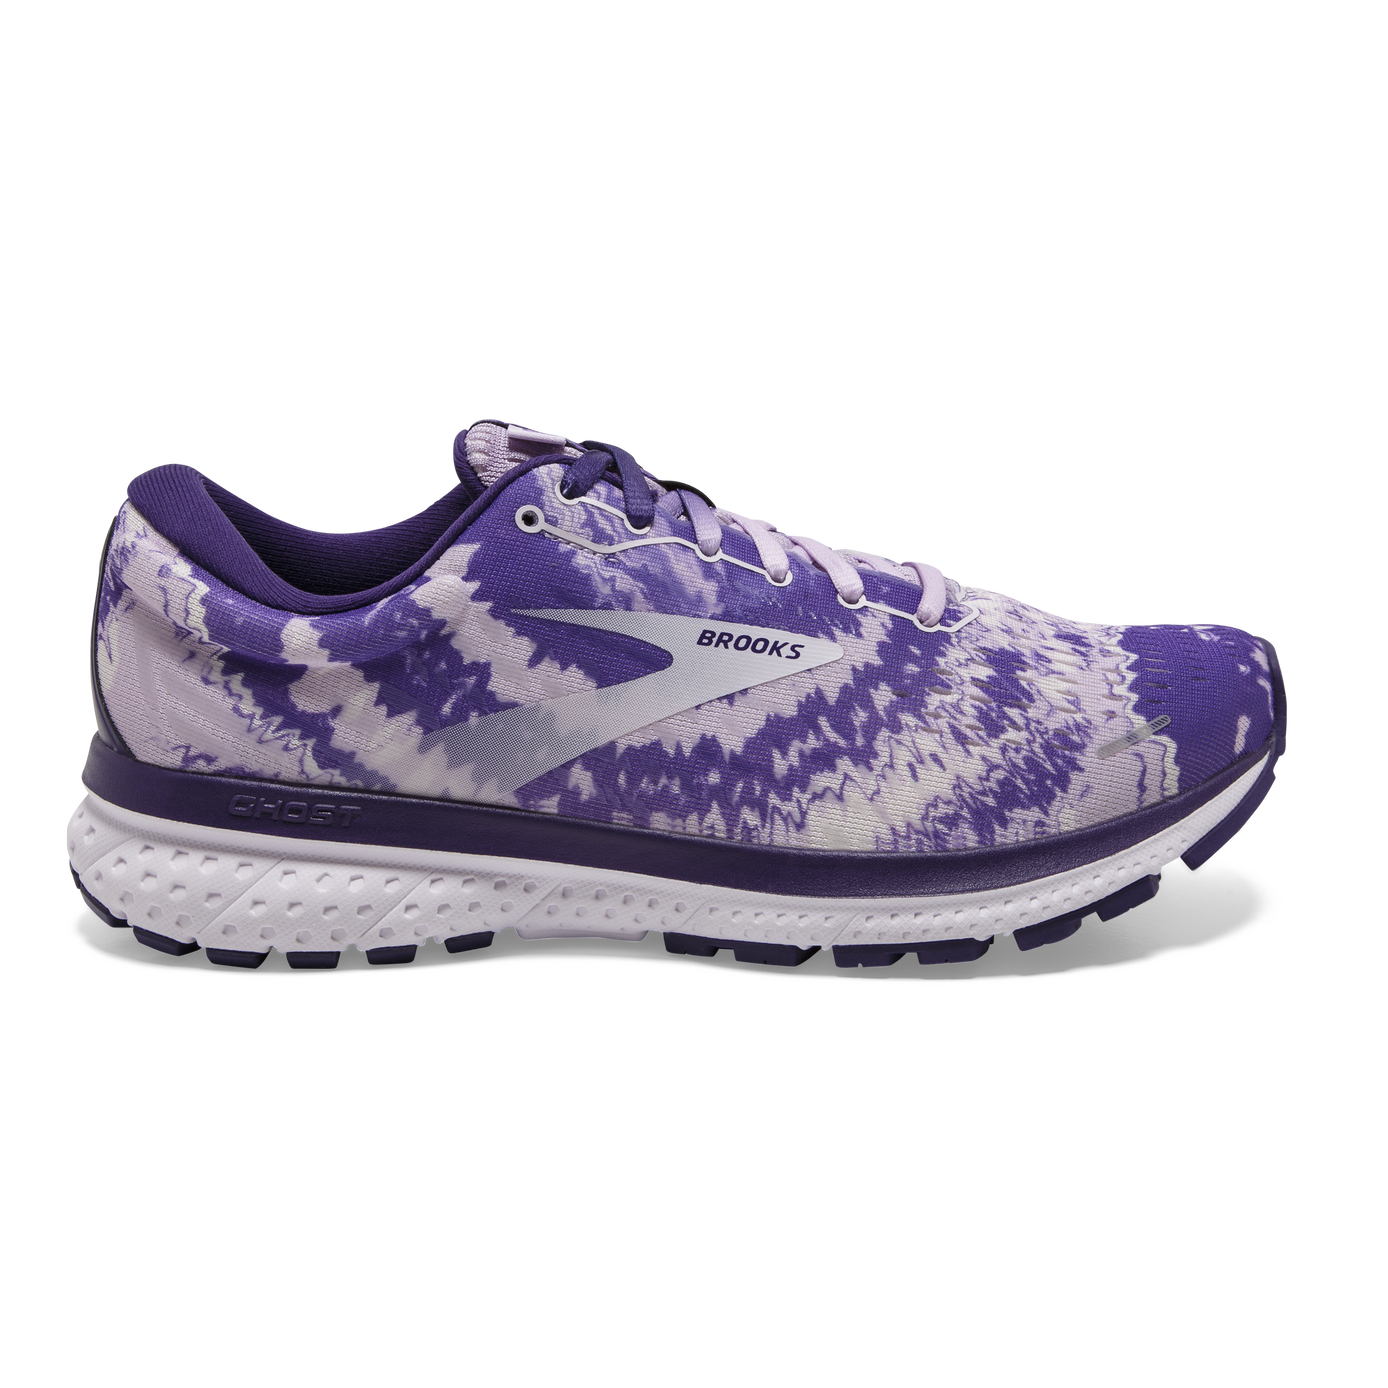 B 435 SAVE $$$ BROOKS GHOST 13 WOMENS RUNNING SHOES